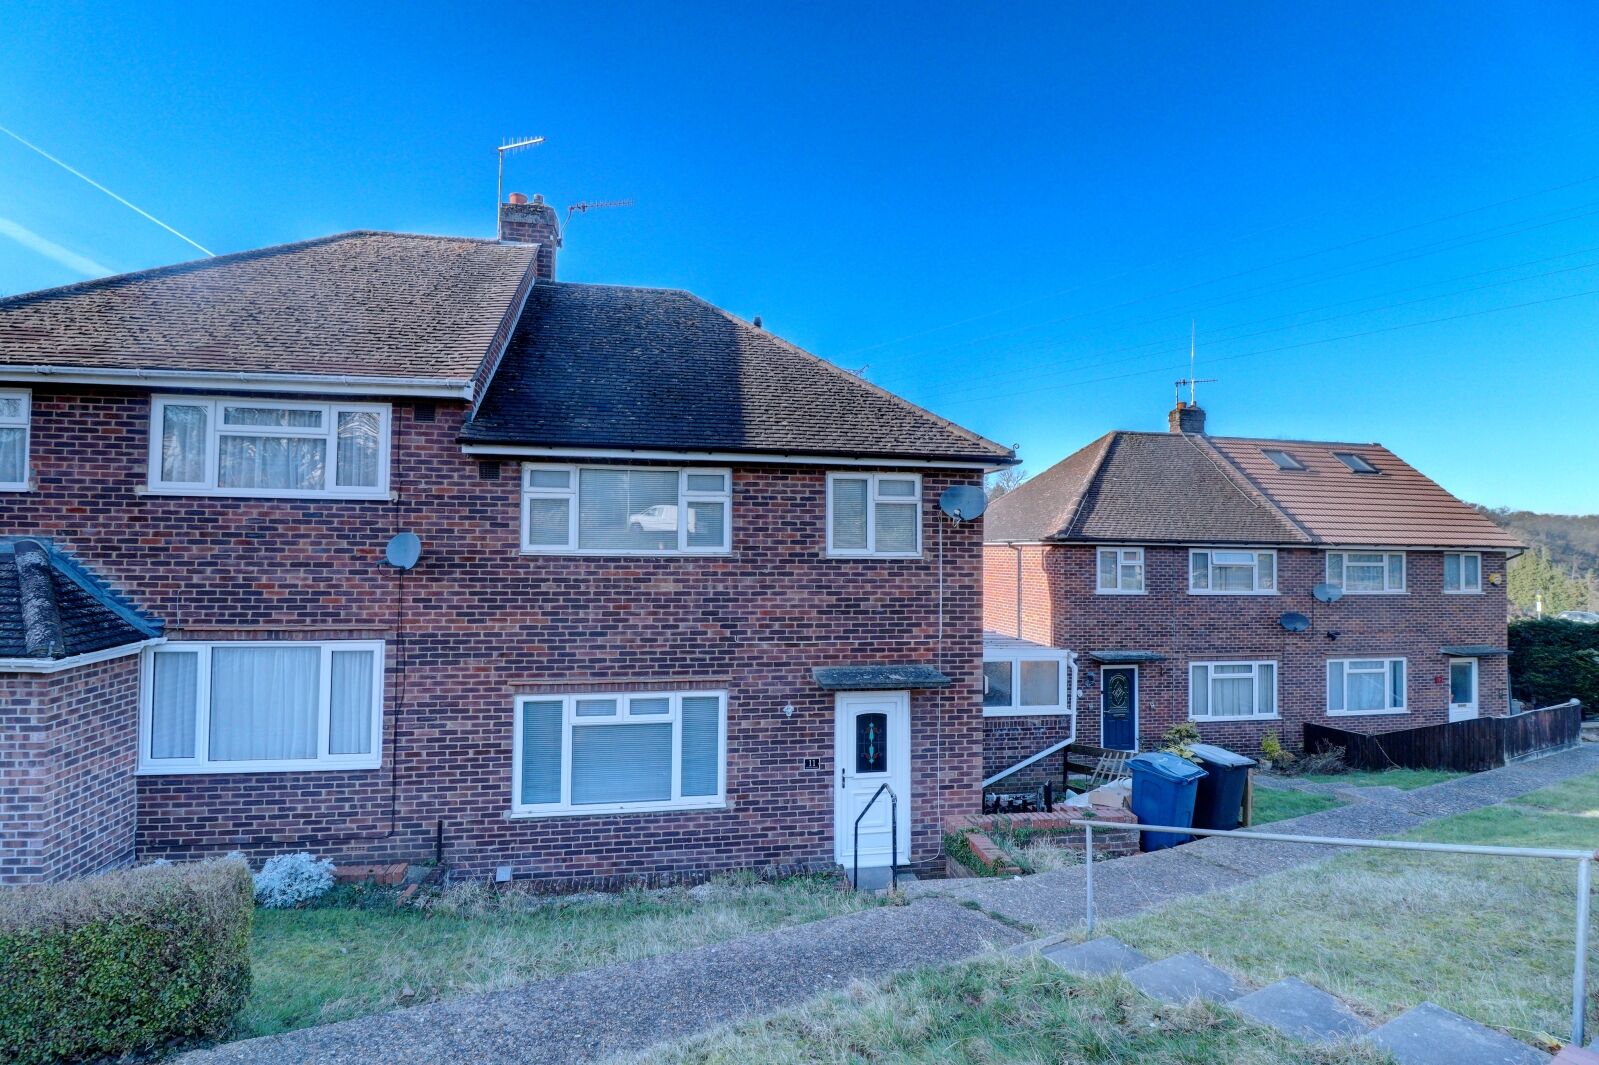 3 bedroom semi detached house to rent, Available now Youens Road, High Wycombe, HP12, main image